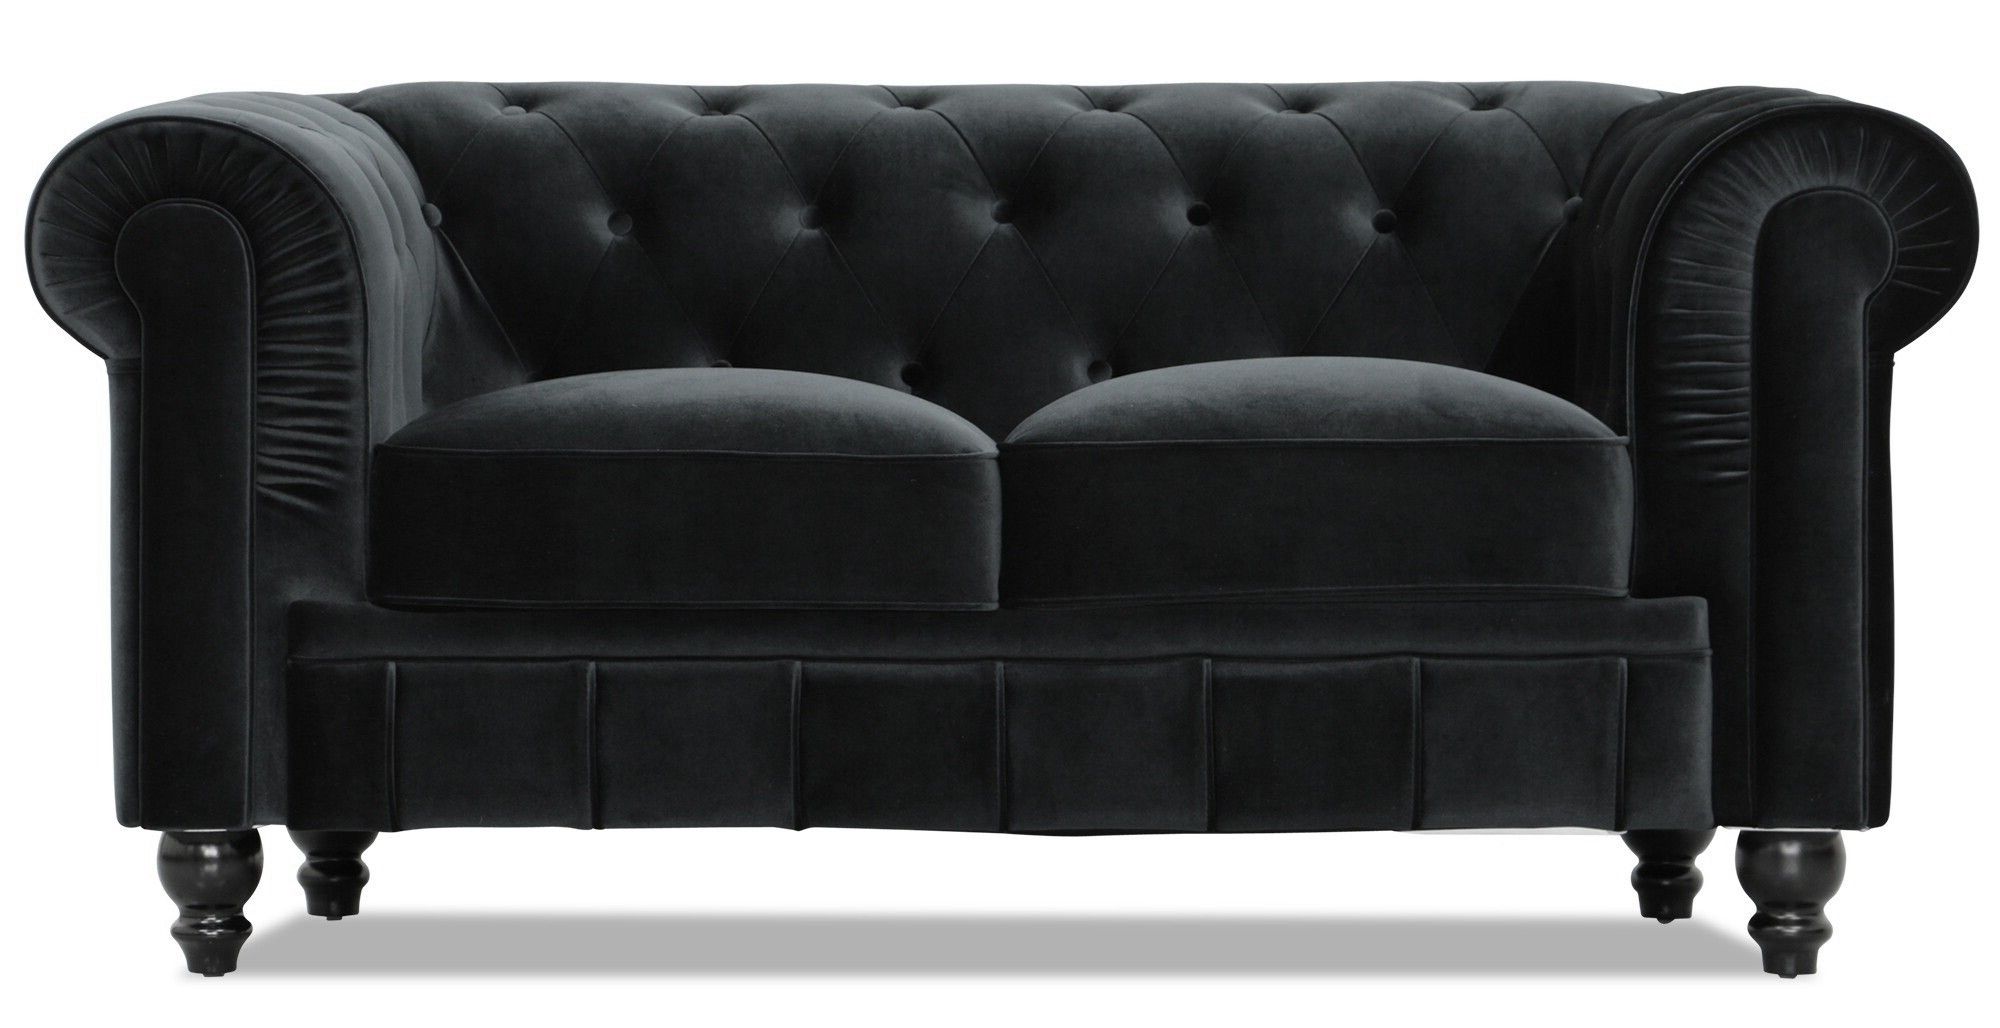 2 Seater Black Velvet Sofa Beds Pertaining To Most Current Benjamin Chesterfield Classical 2 Seater Sofa (velvet Black (View 4 of 15)